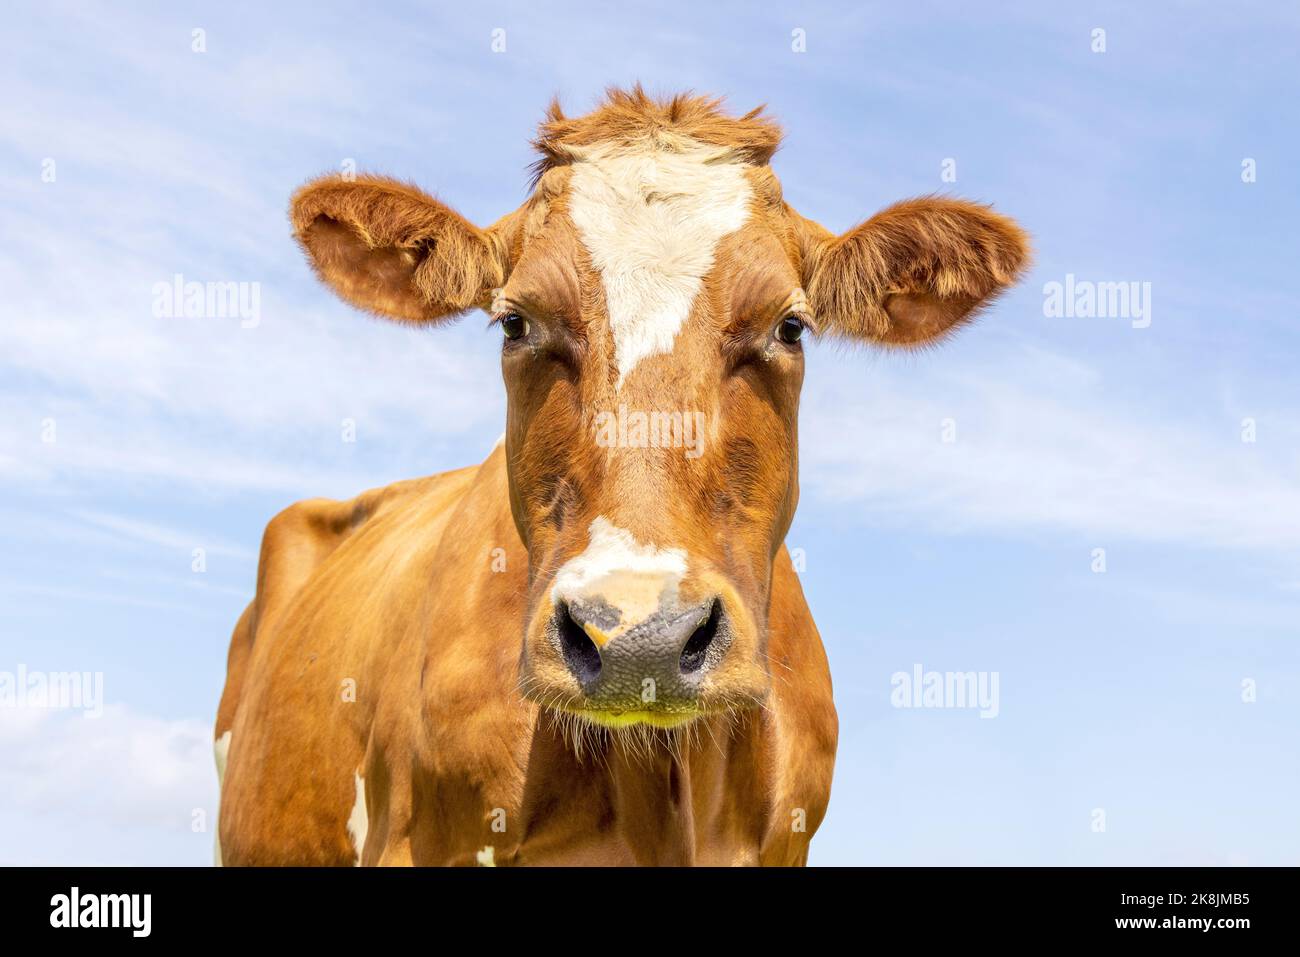 Cow portrait of a lovely red bovine looking, friendly and calm expression, a sky background Stock Photo